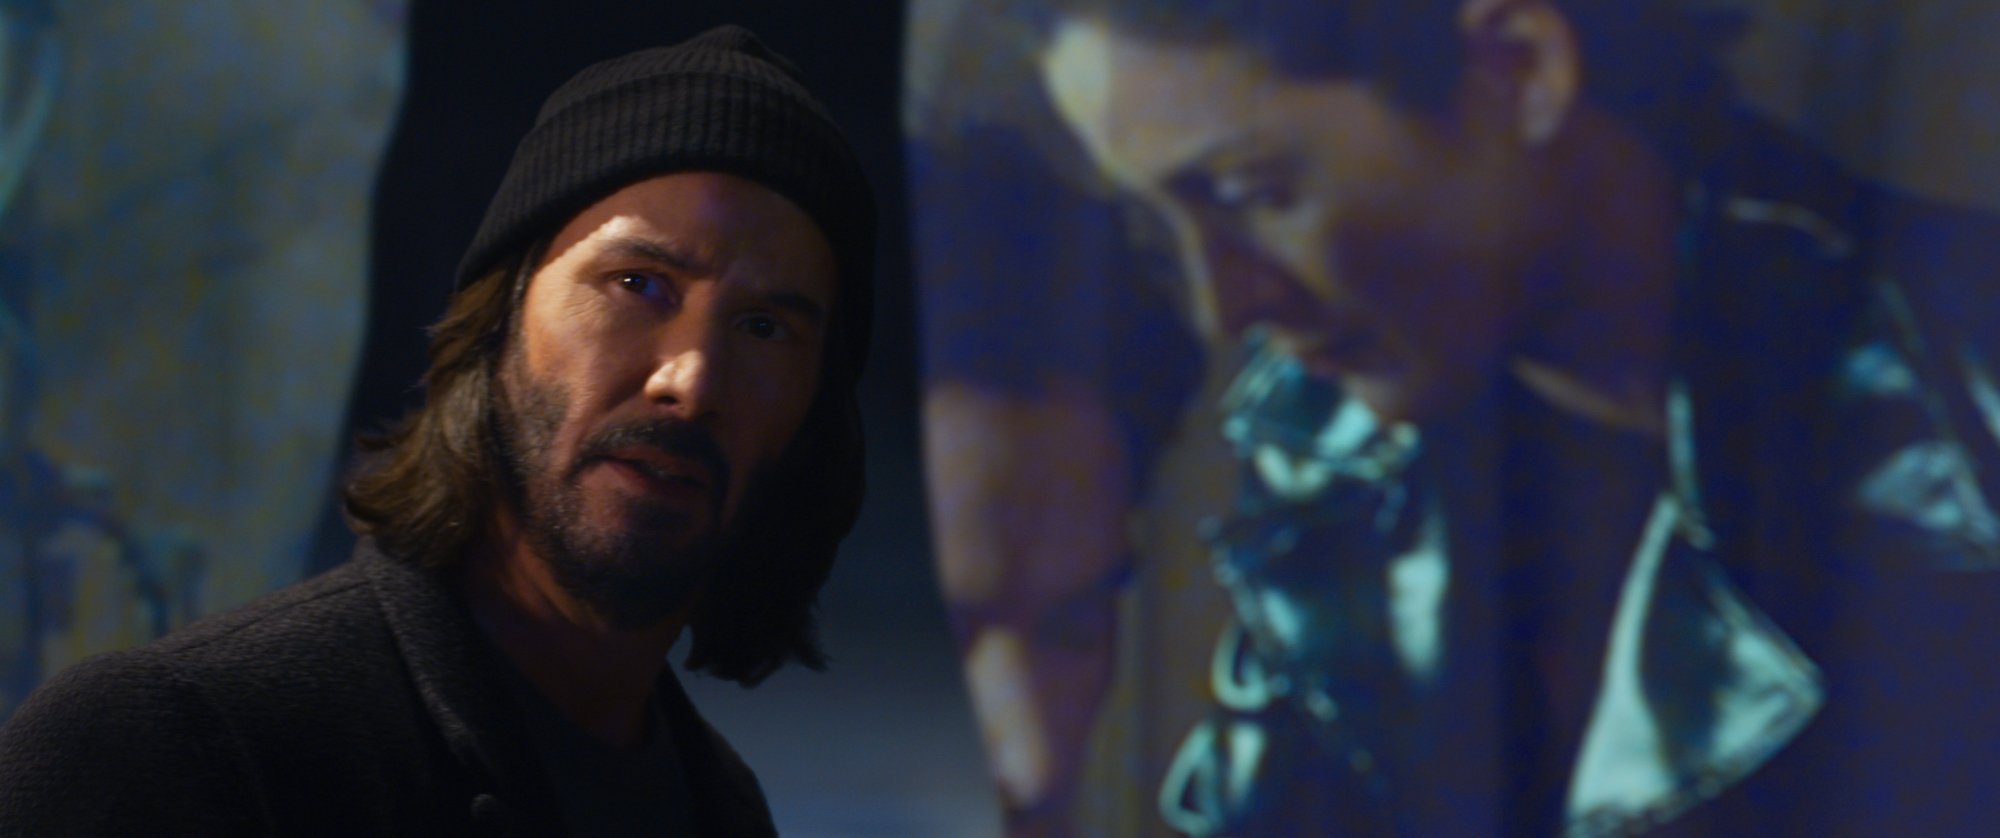 'The Matrix Resurrections' Keanu Reeves as Neo and Carrie-Anne Moss as Trinity wearing a cap in front of a screen